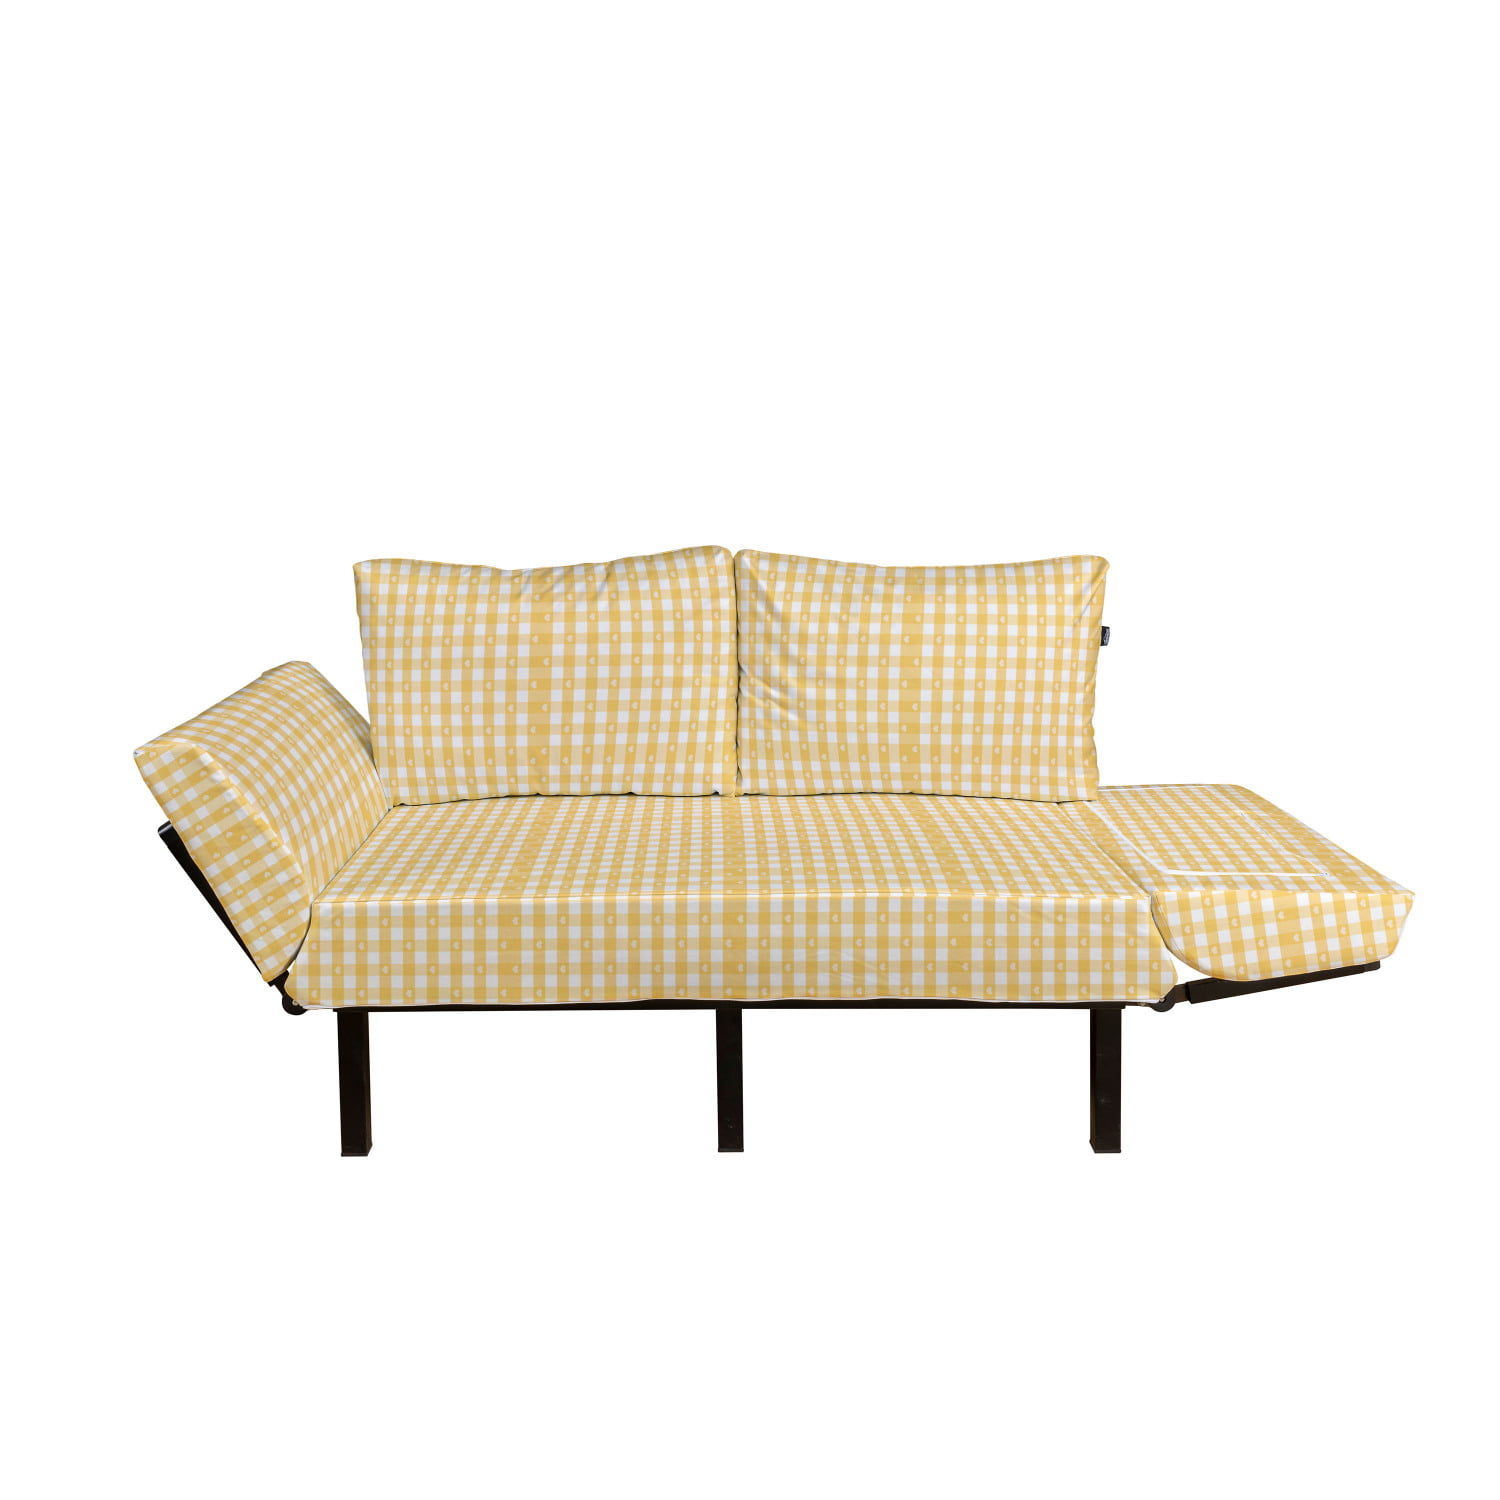 Gingham Pattern with Bicolor Checkered Squares with Heart Shaped Motifs Loveseat Daybed with Metal Frame Upholstered Sofa for Living Dorm Ambesonne Vintage Futon Couch Mustard and White